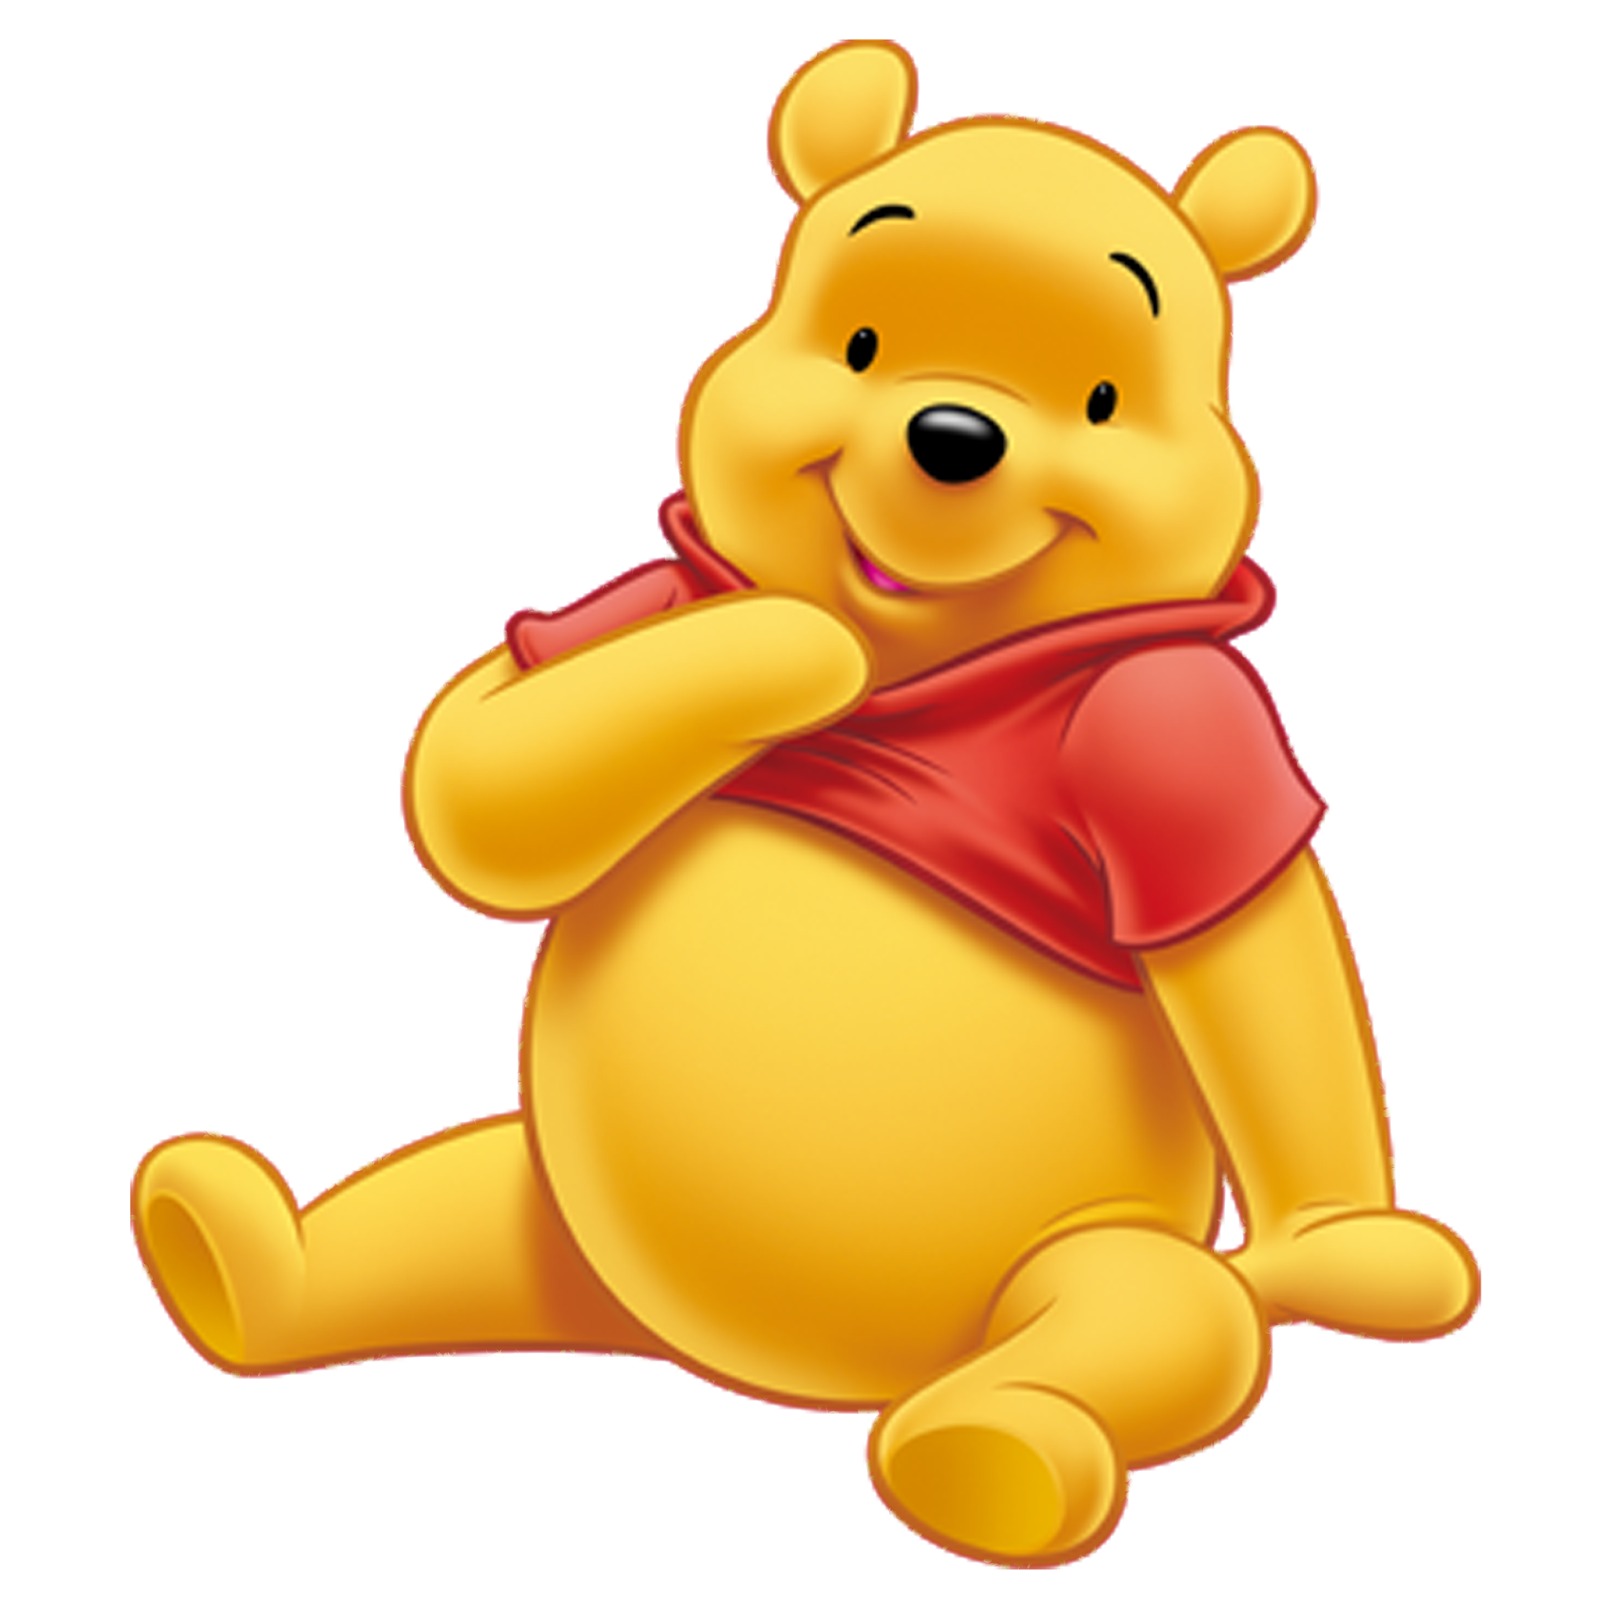 https://facts.net/wp-content/uploads/2023/08/17-facts-about-pooh-bear-winnie-the-pooh-1692254690.jpg